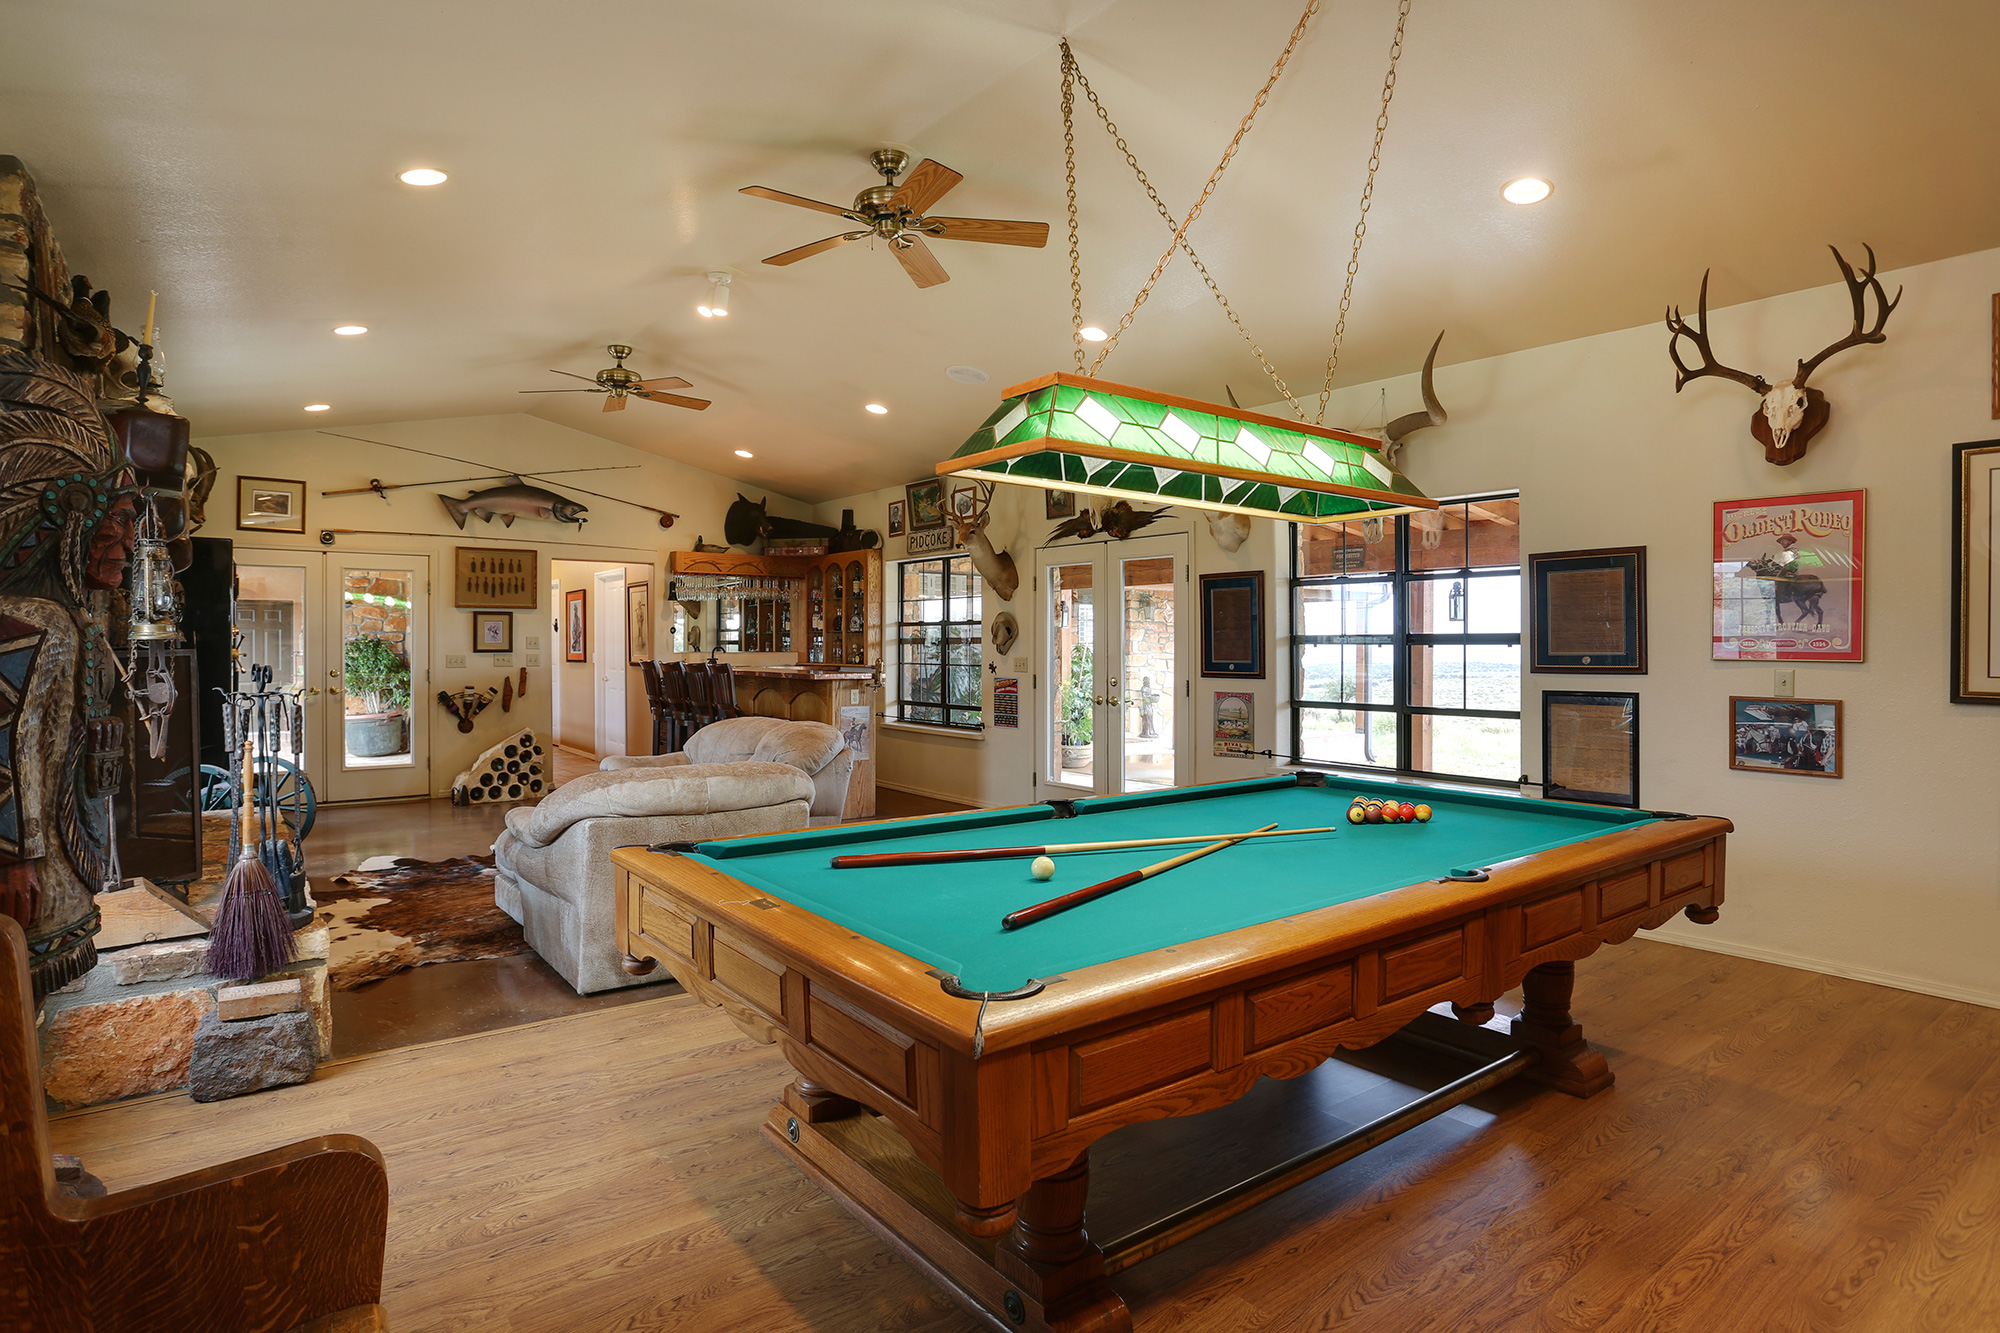 Game / Recreational Room